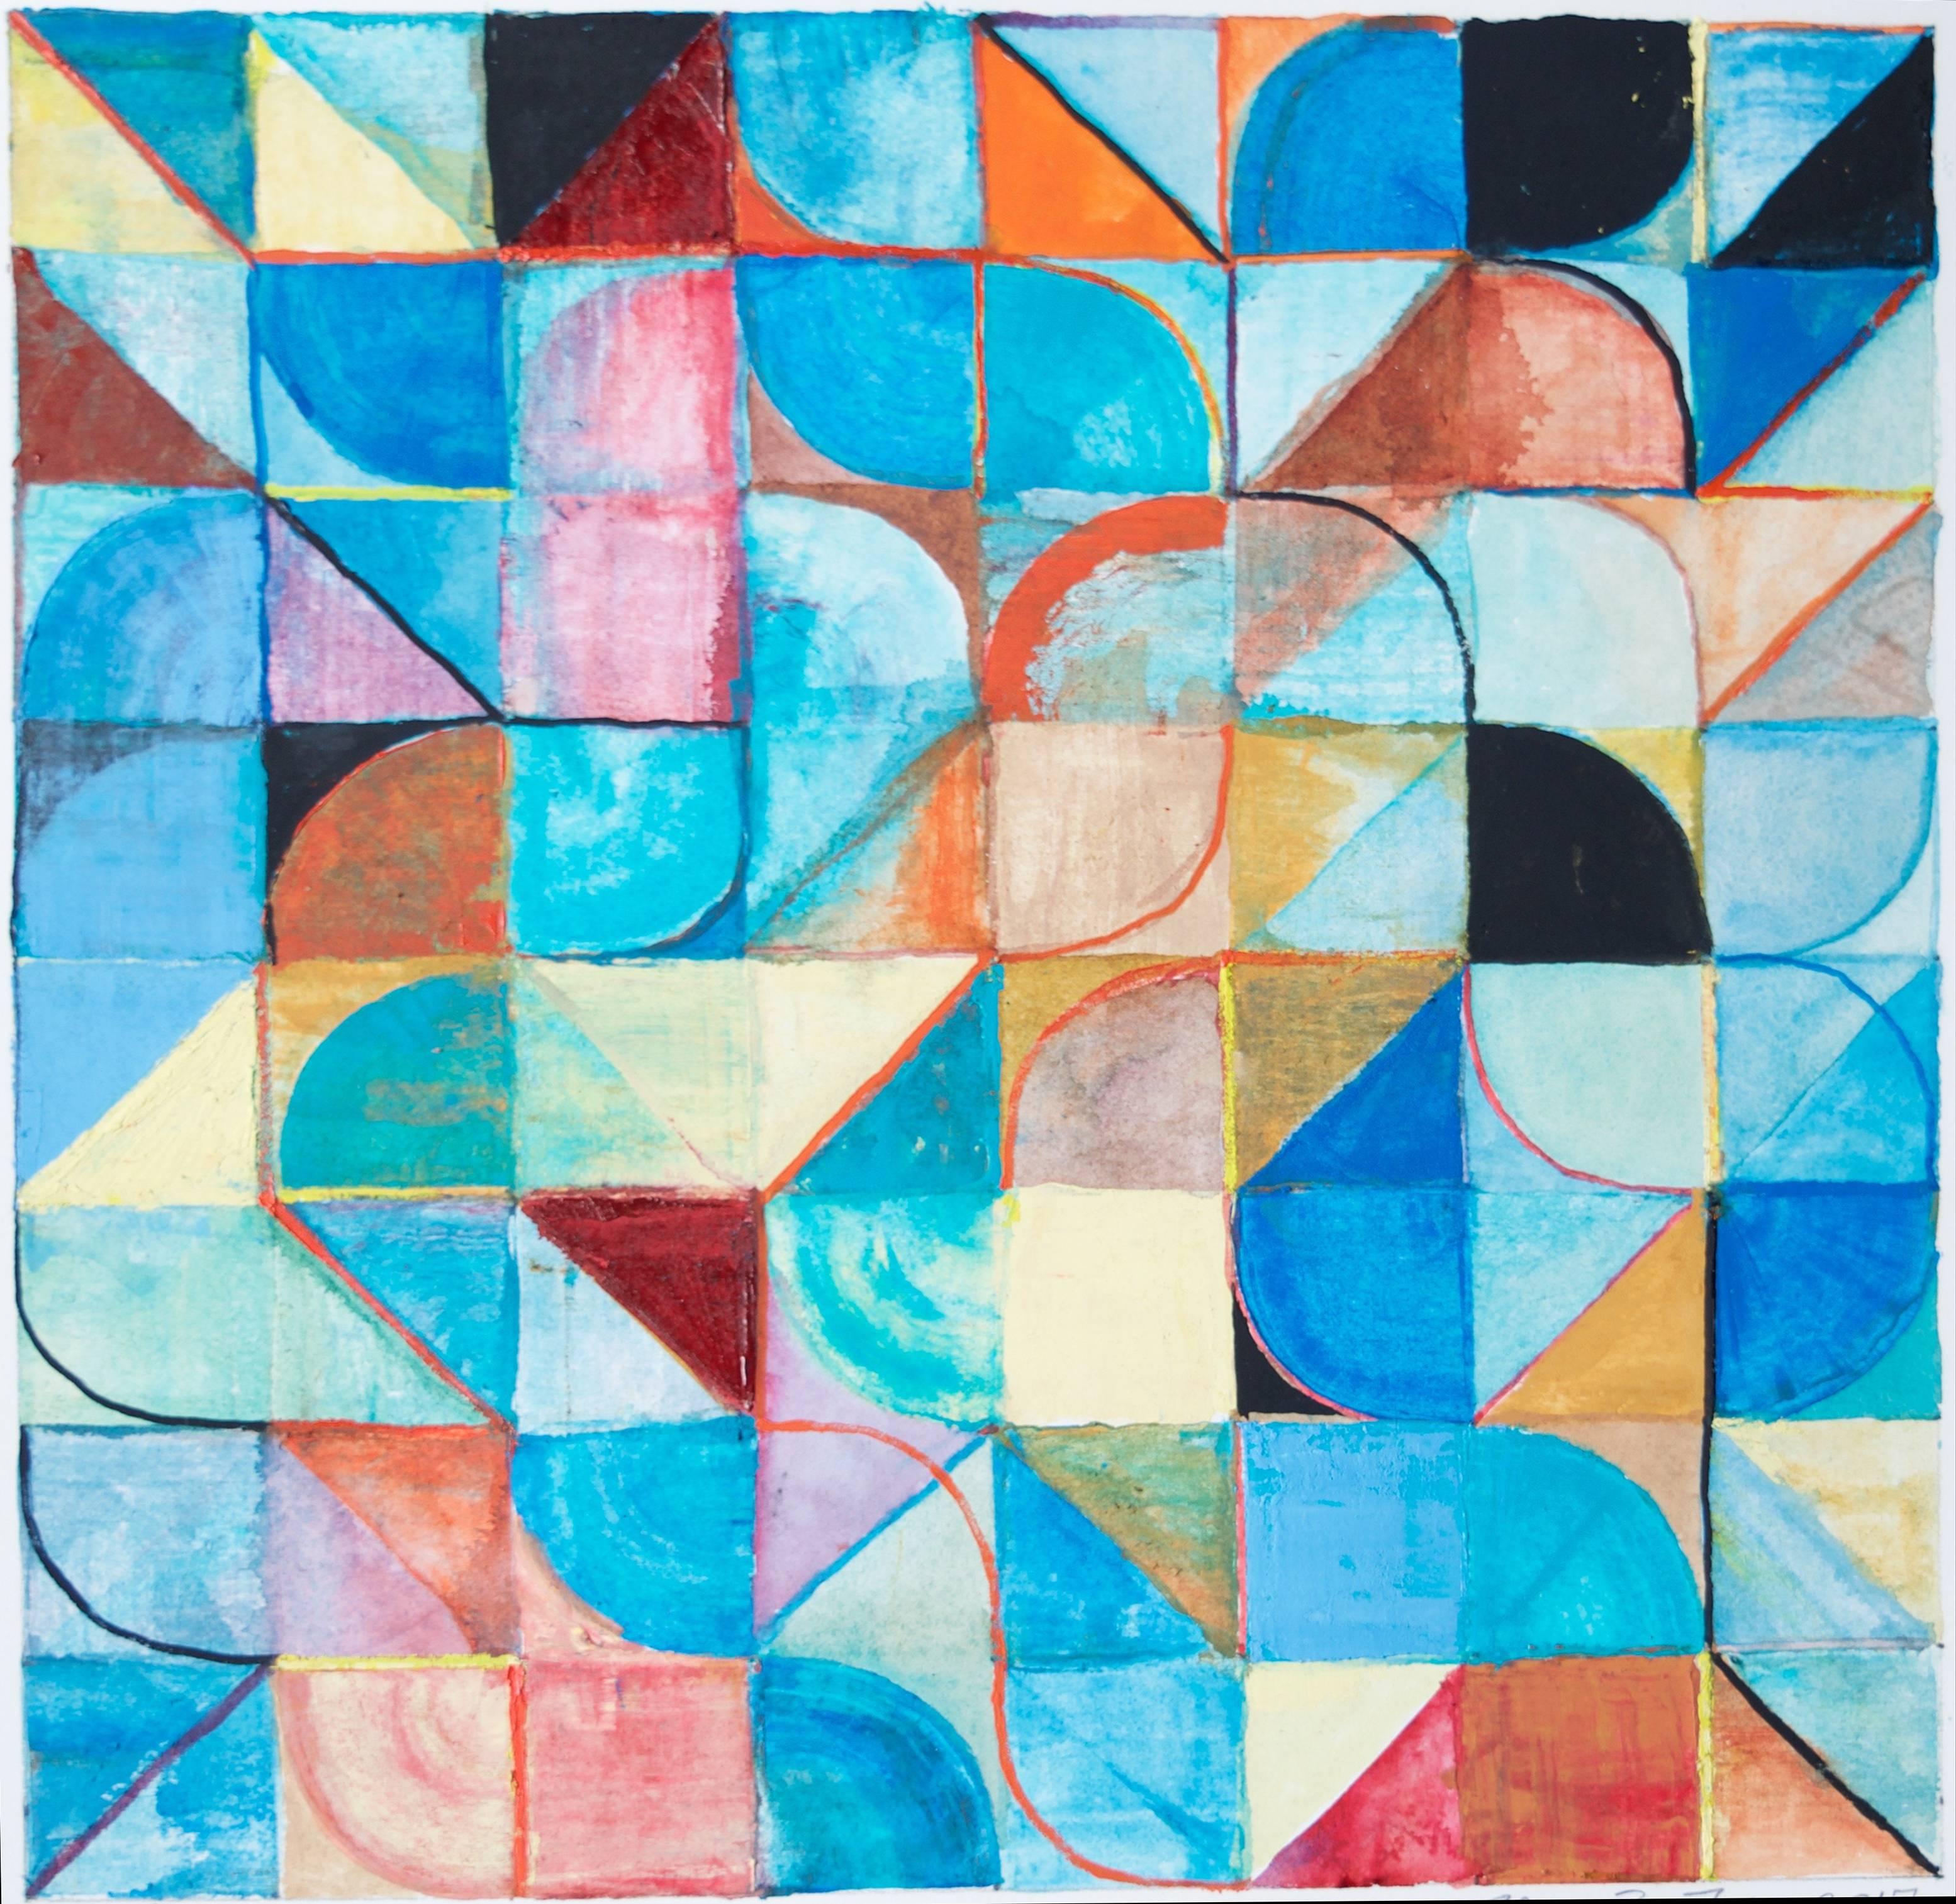 Ellipses #72 - Painting by Power Boothe